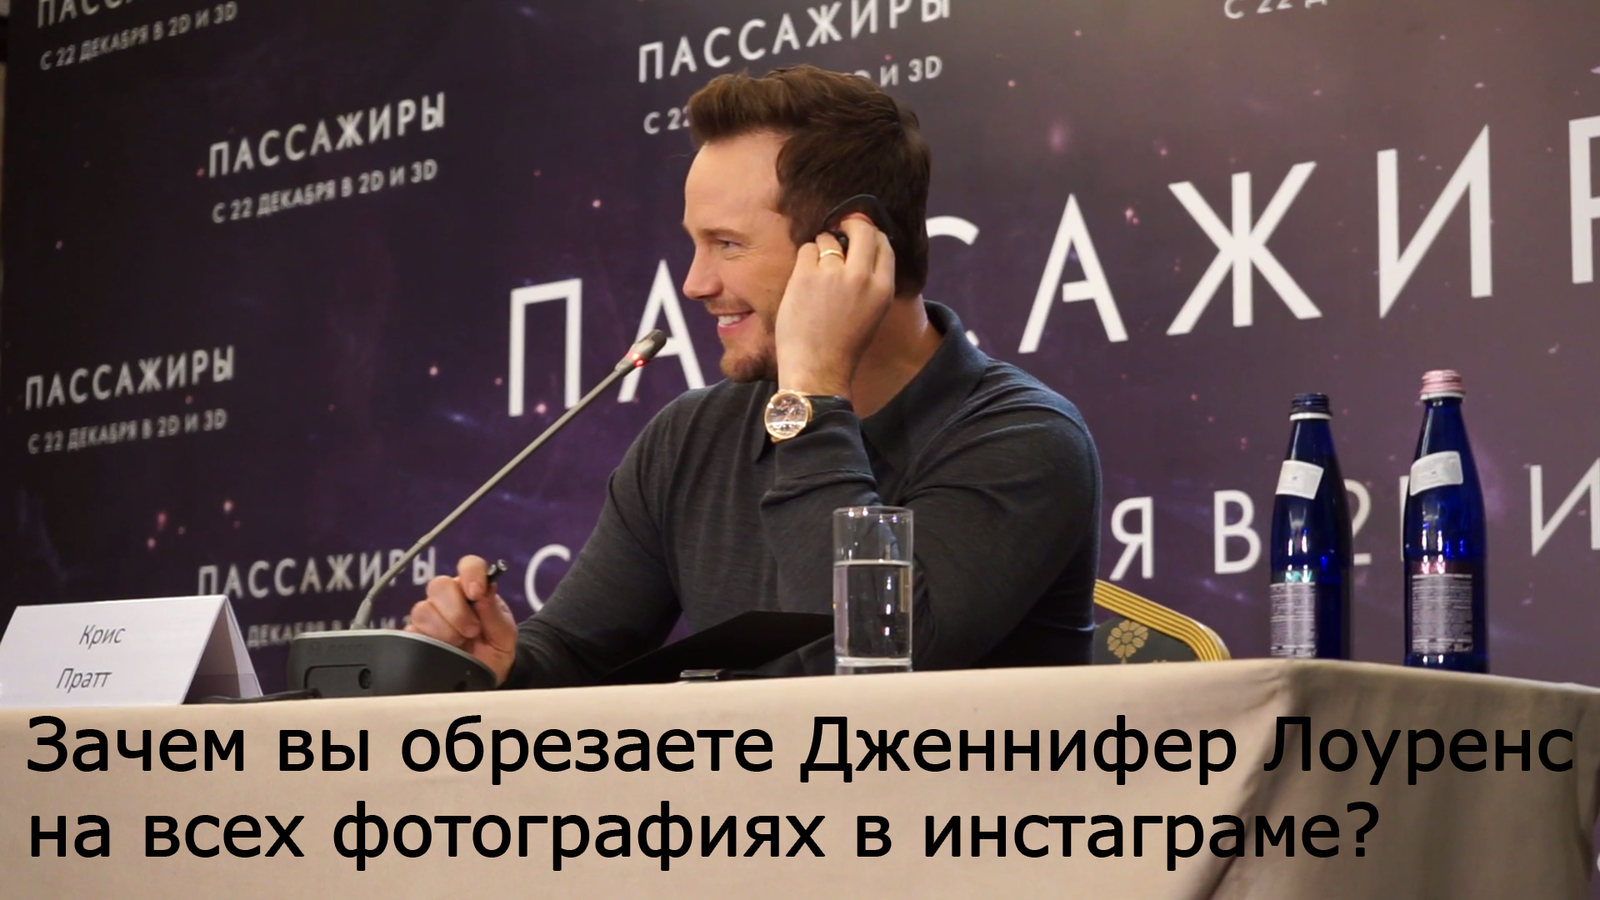 Press conference with Chris Pratt in Moscow as part of the promotional tour of the film Passengers - Movies, Chris Pratt, Jennifer Lawrence, Instagram, Пассажиры, Press conference, Photo, Longpost